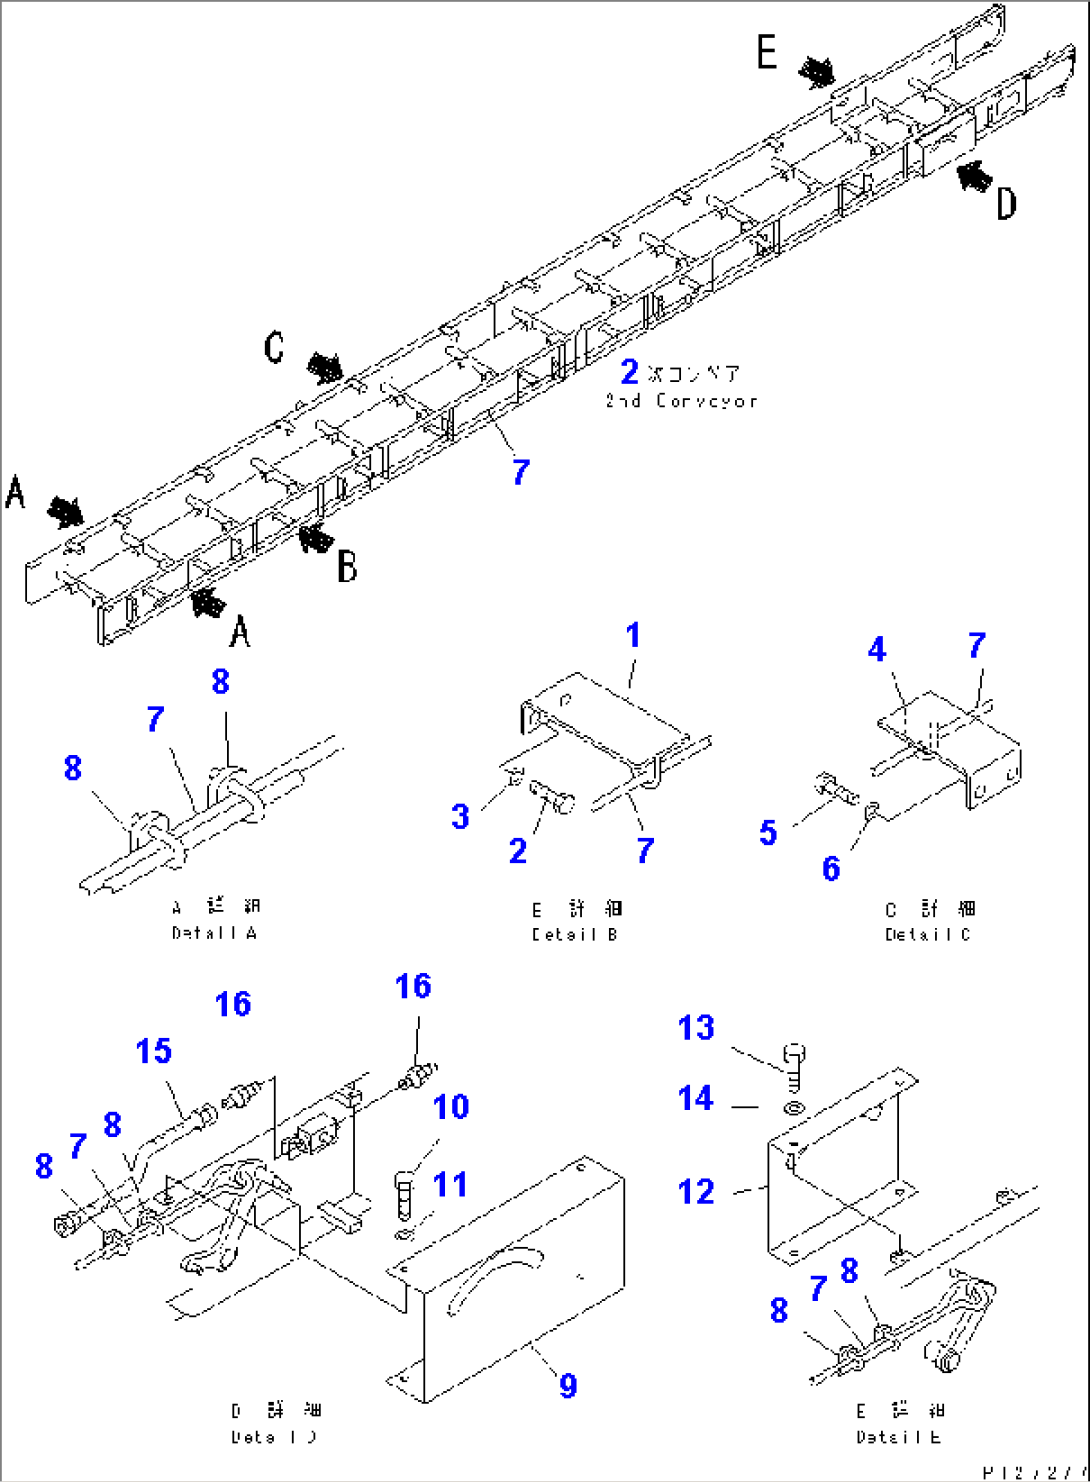 2ND CONVEYOR (INNER PARTS) (7/10) (600MM WIDTH) (WITH EMERGENCY SWITCH)